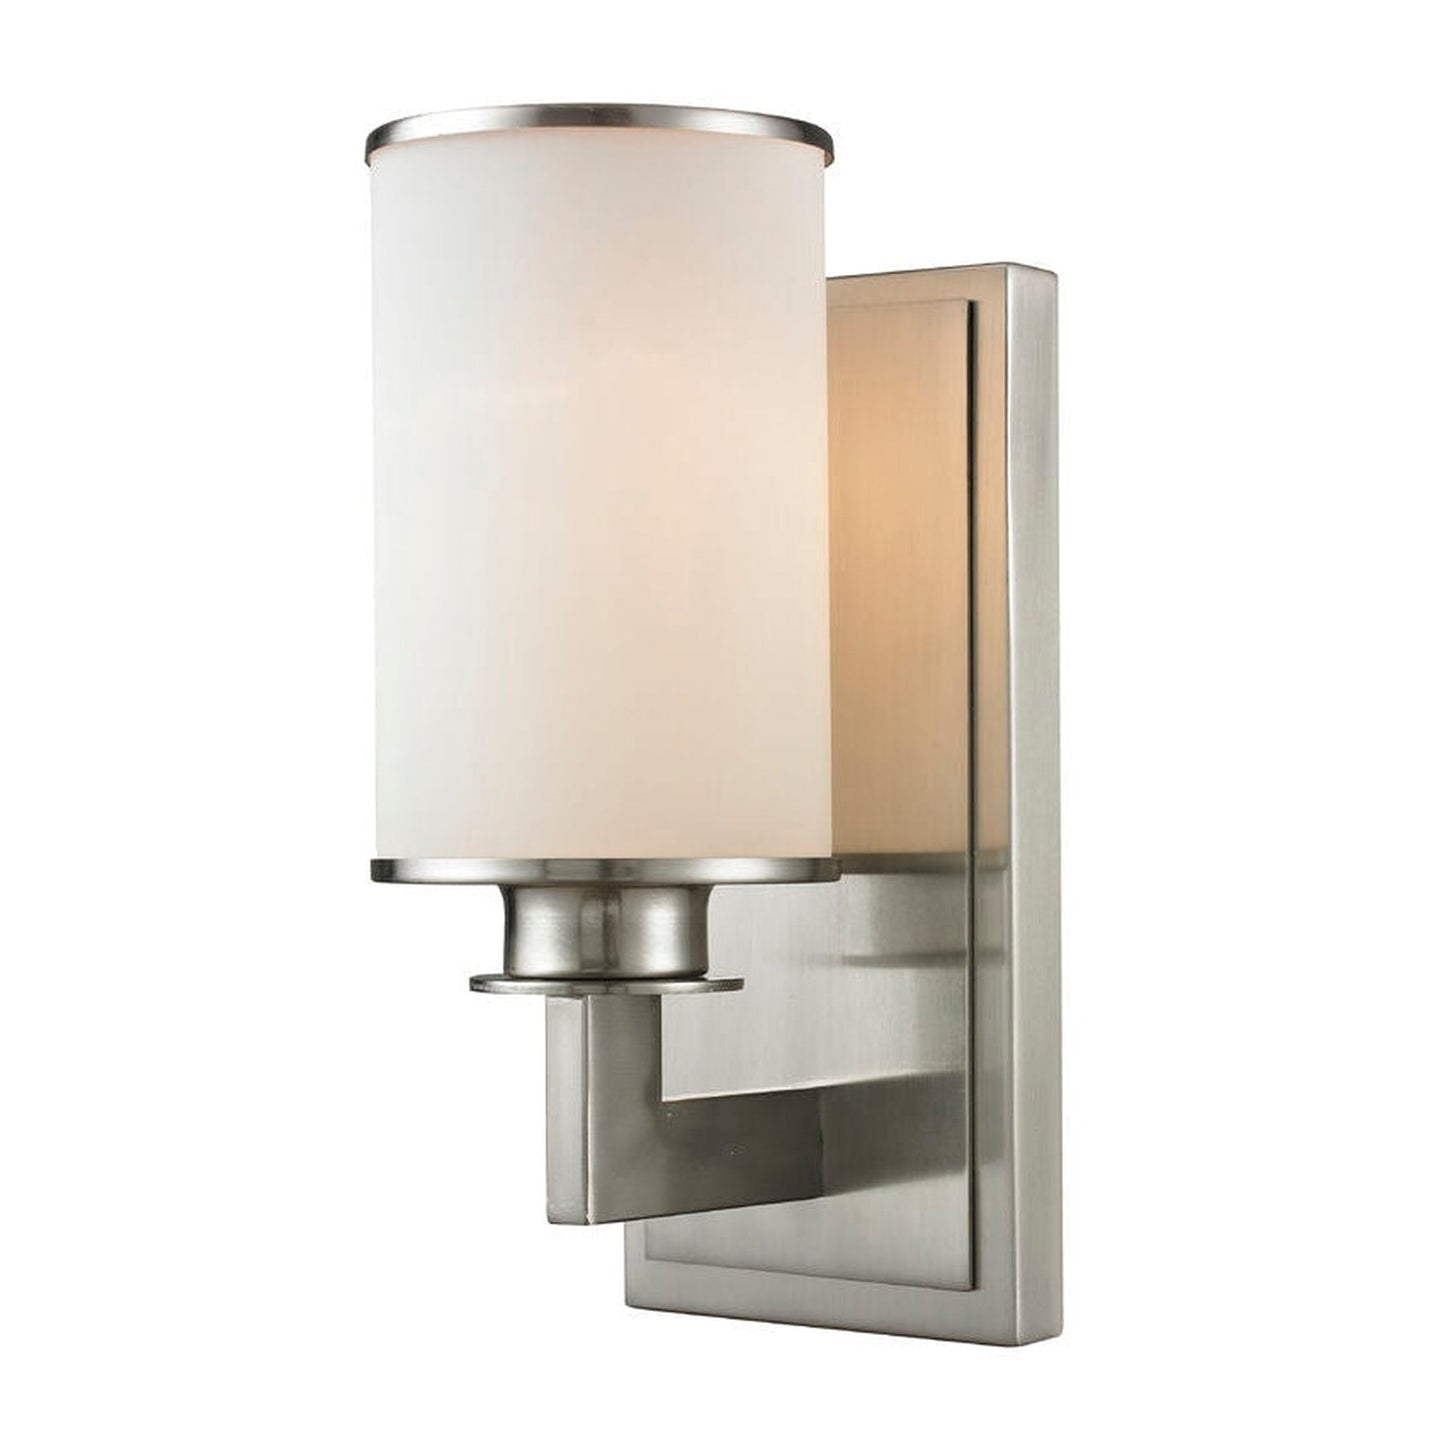 Z-Lite Savannah 5" 1-Light Brushed Nickel Wall Sconce With Matte Opal Glass Shade